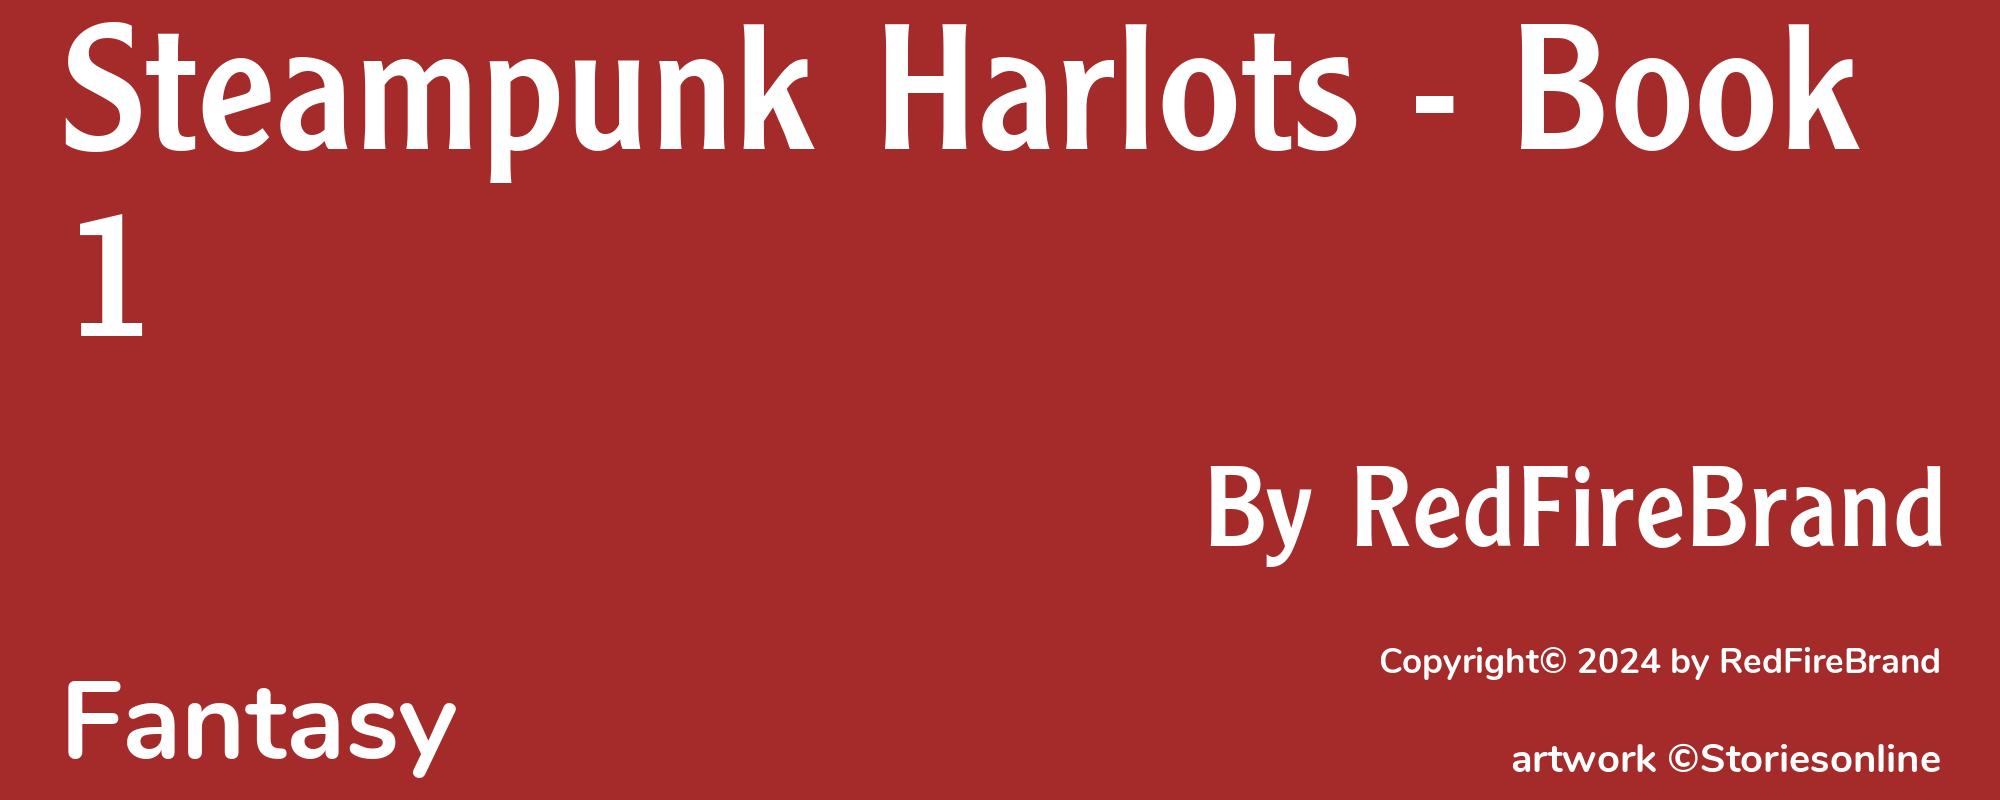 Steampunk Harlots - Book 1 - Cover